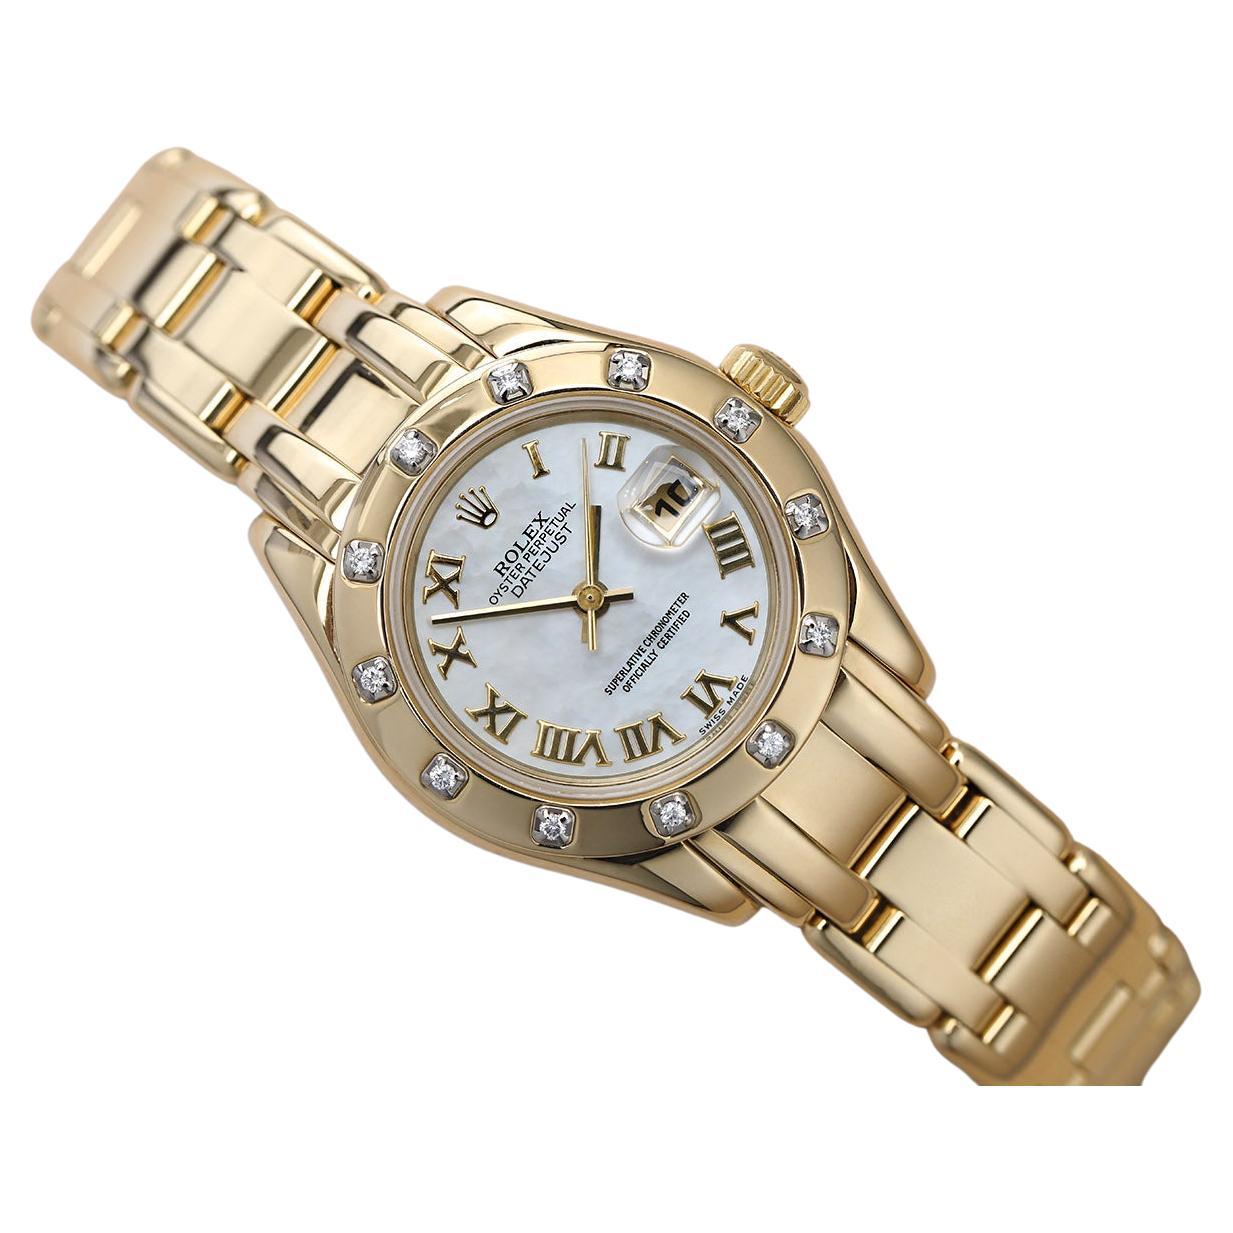 Rolex Pearlmaster 18k Yellow Gold Watch with White Mother of Pearl 80318